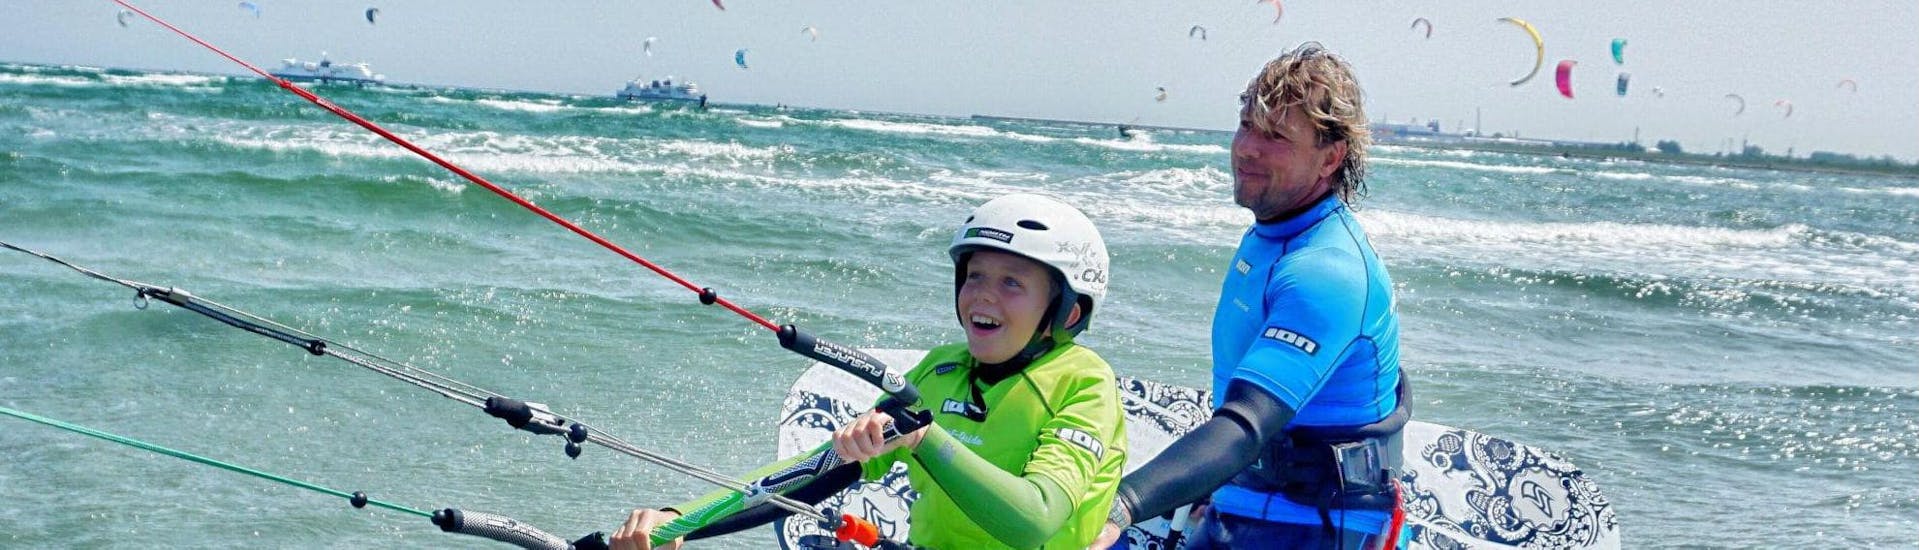 The teacher and a child during Kitesurfing Premium Lessons from 8 years in Fehmarn with Kitesurf-Guide Fehmarn.